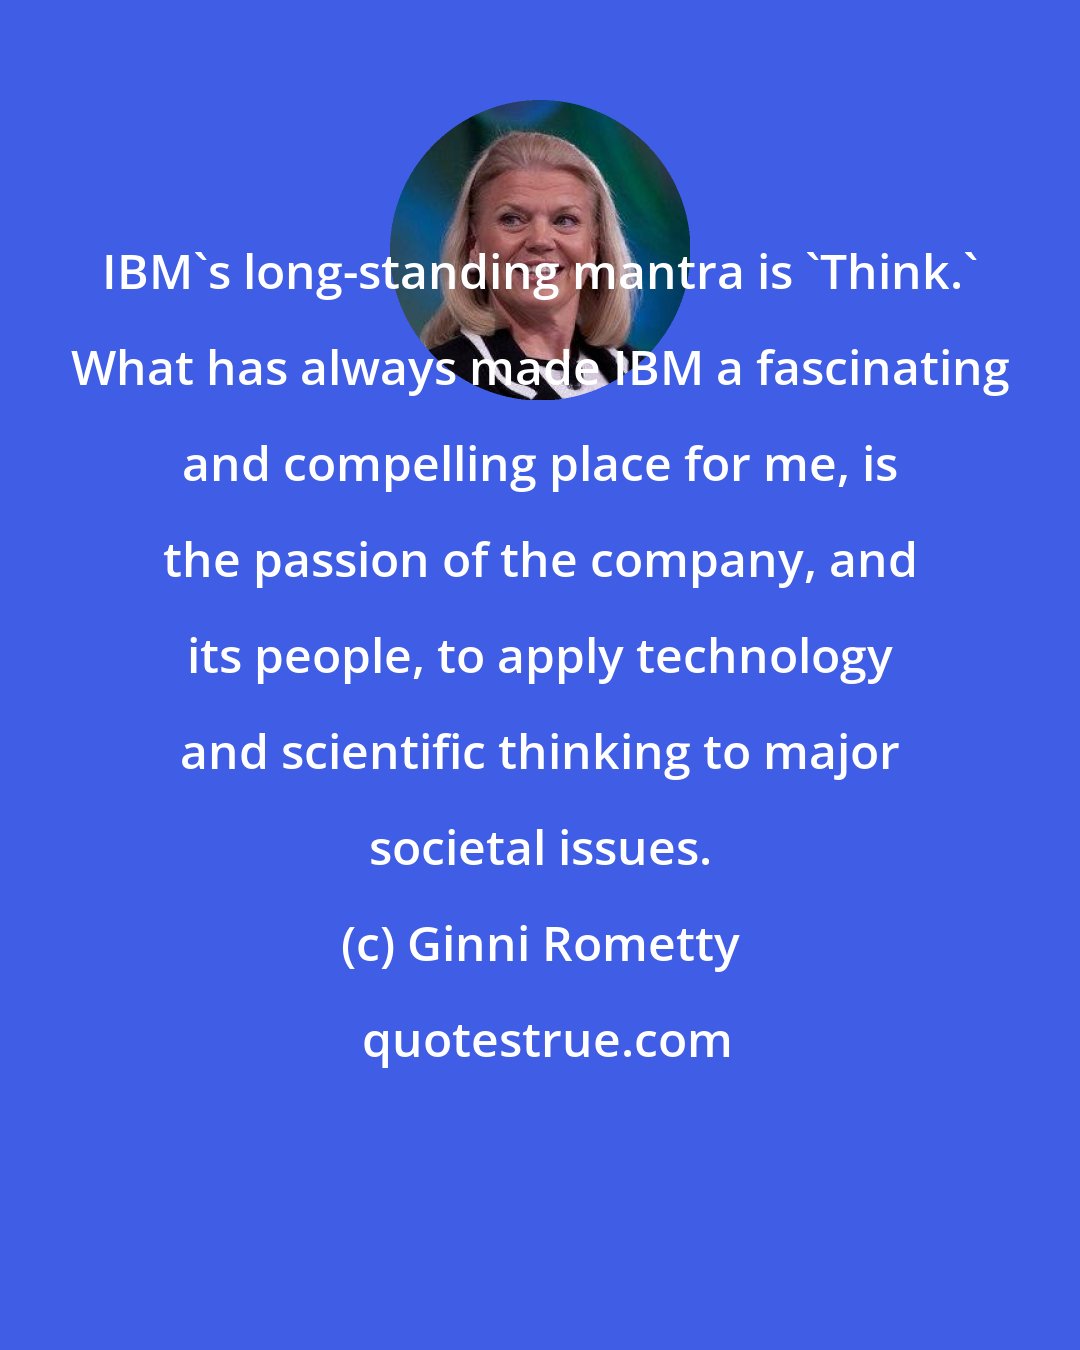 Ginni Rometty: IBM's long-standing mantra is 'Think.' What has always made IBM a fascinating and compelling place for me, is the passion of the company, and its people, to apply technology and scientific thinking to major societal issues.